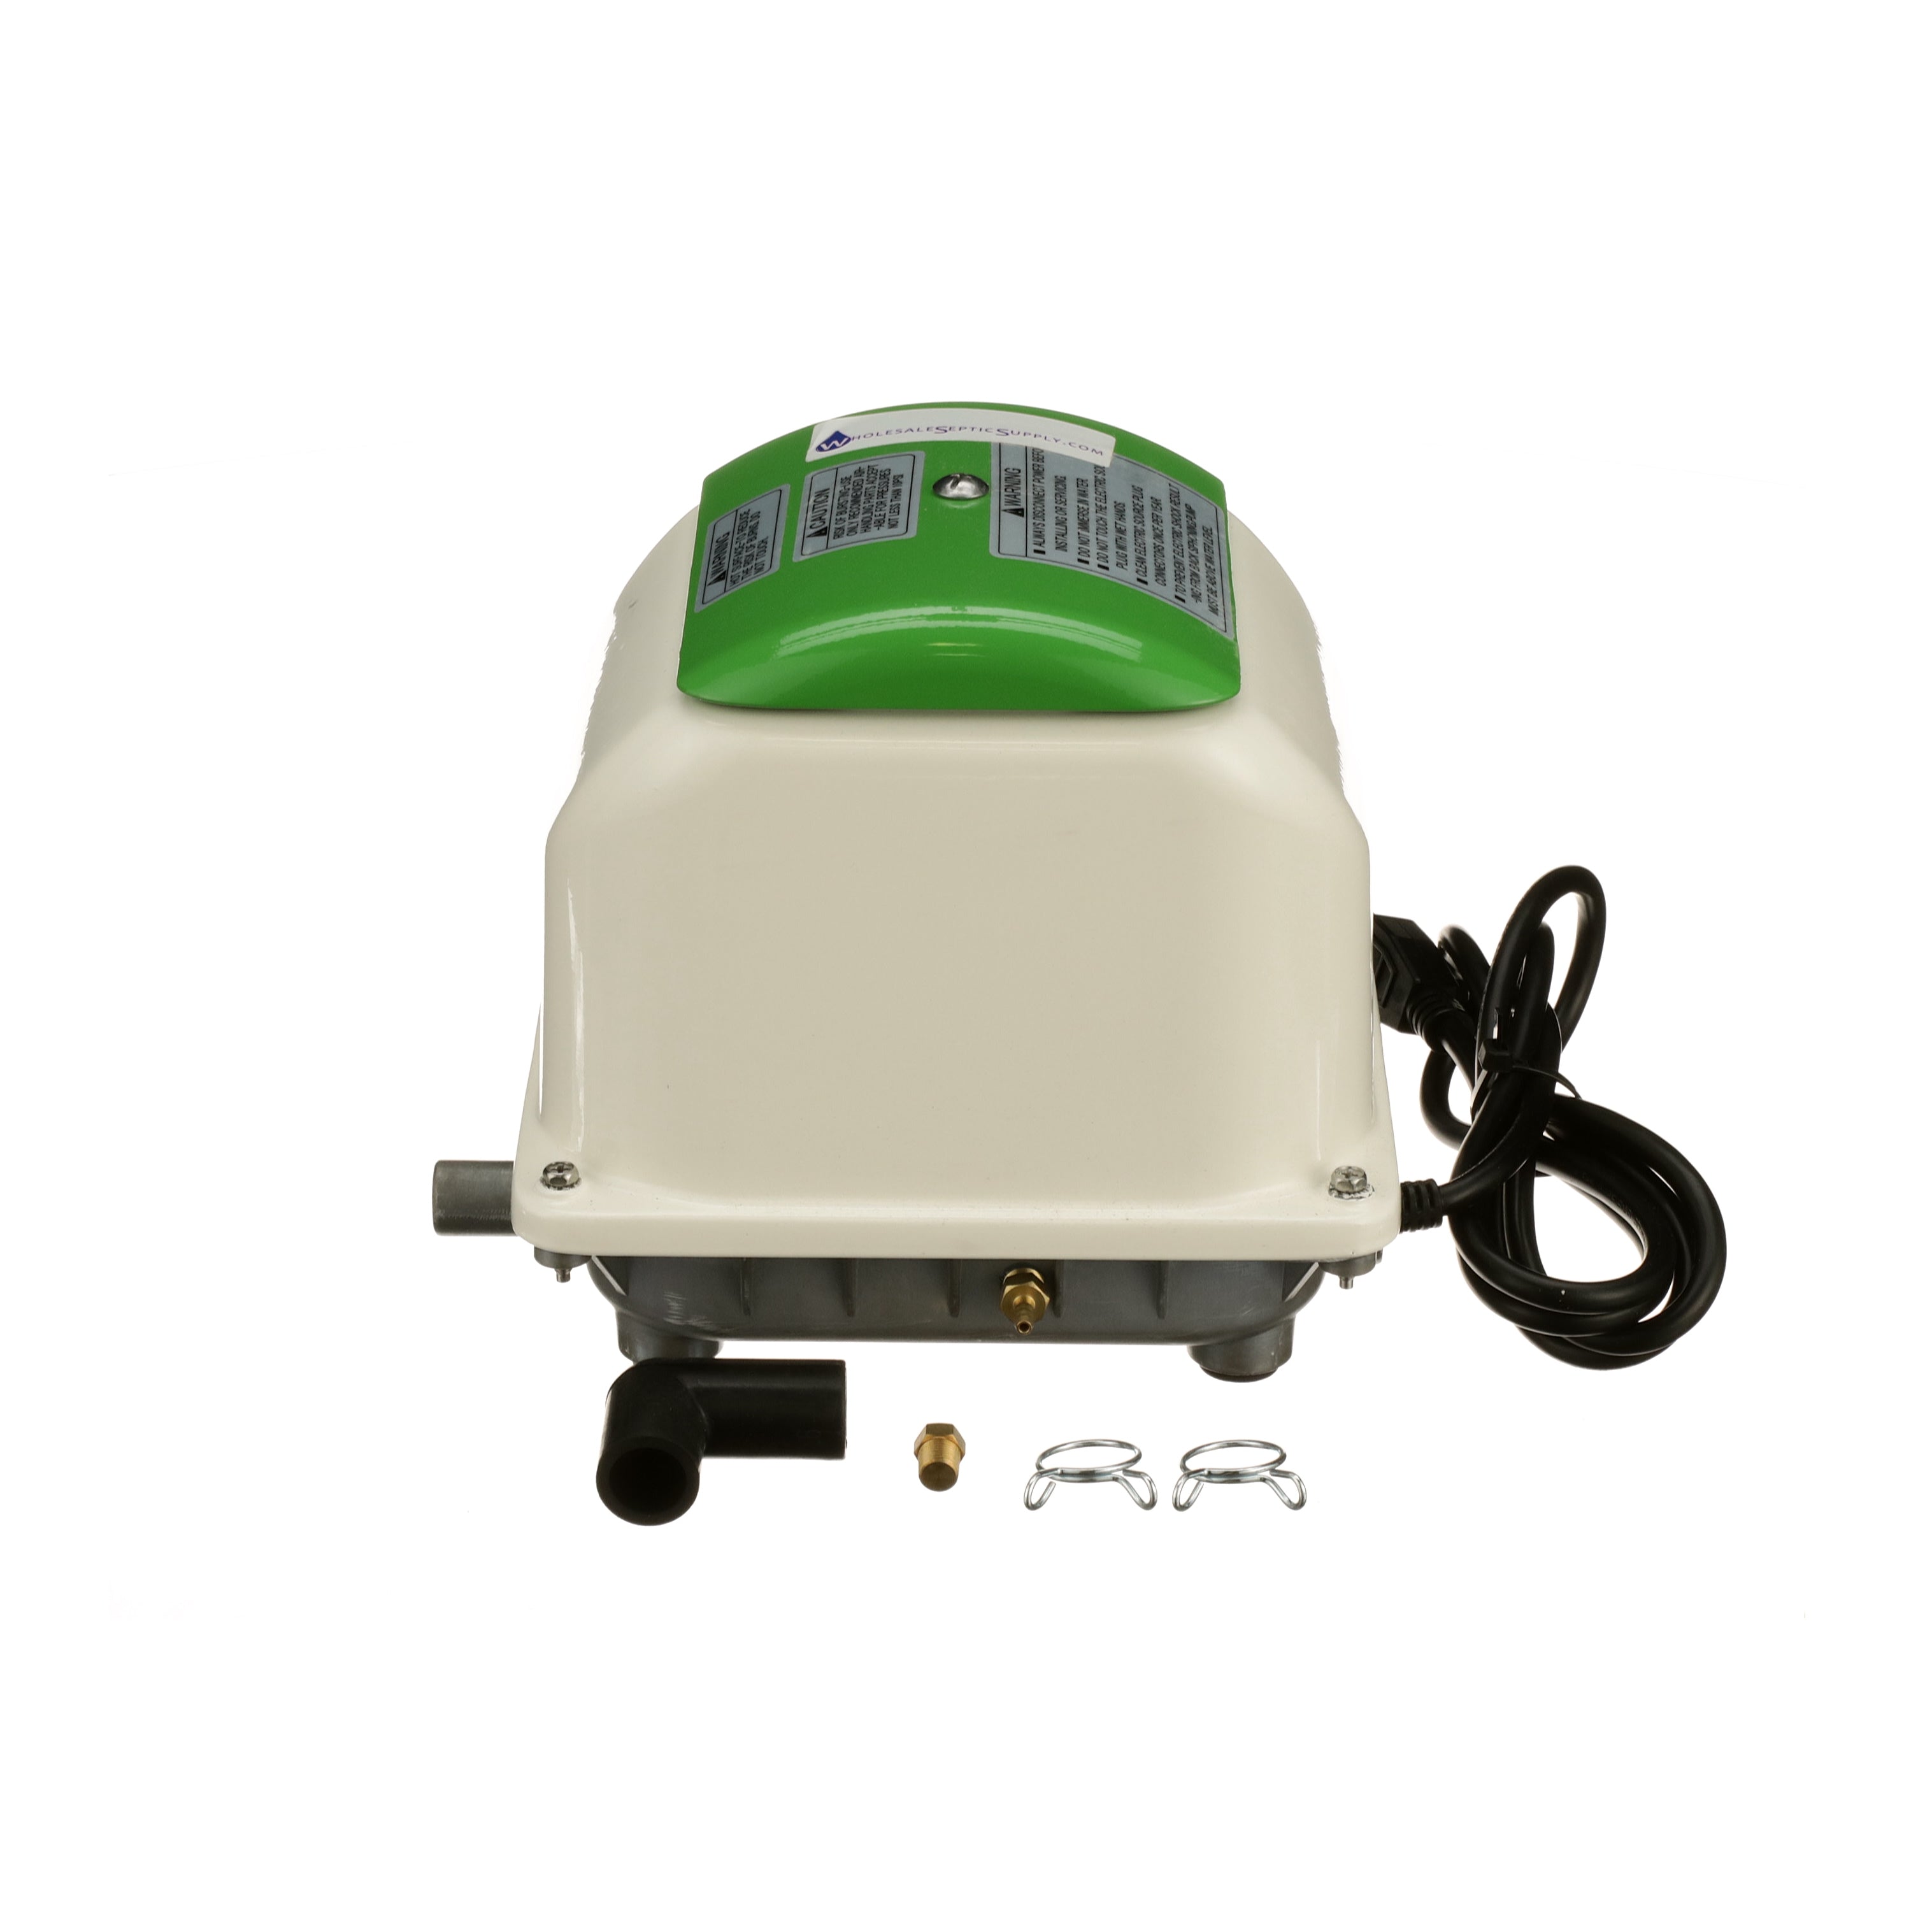 Secoh Septic Air Pump Wholesale Septic Supply